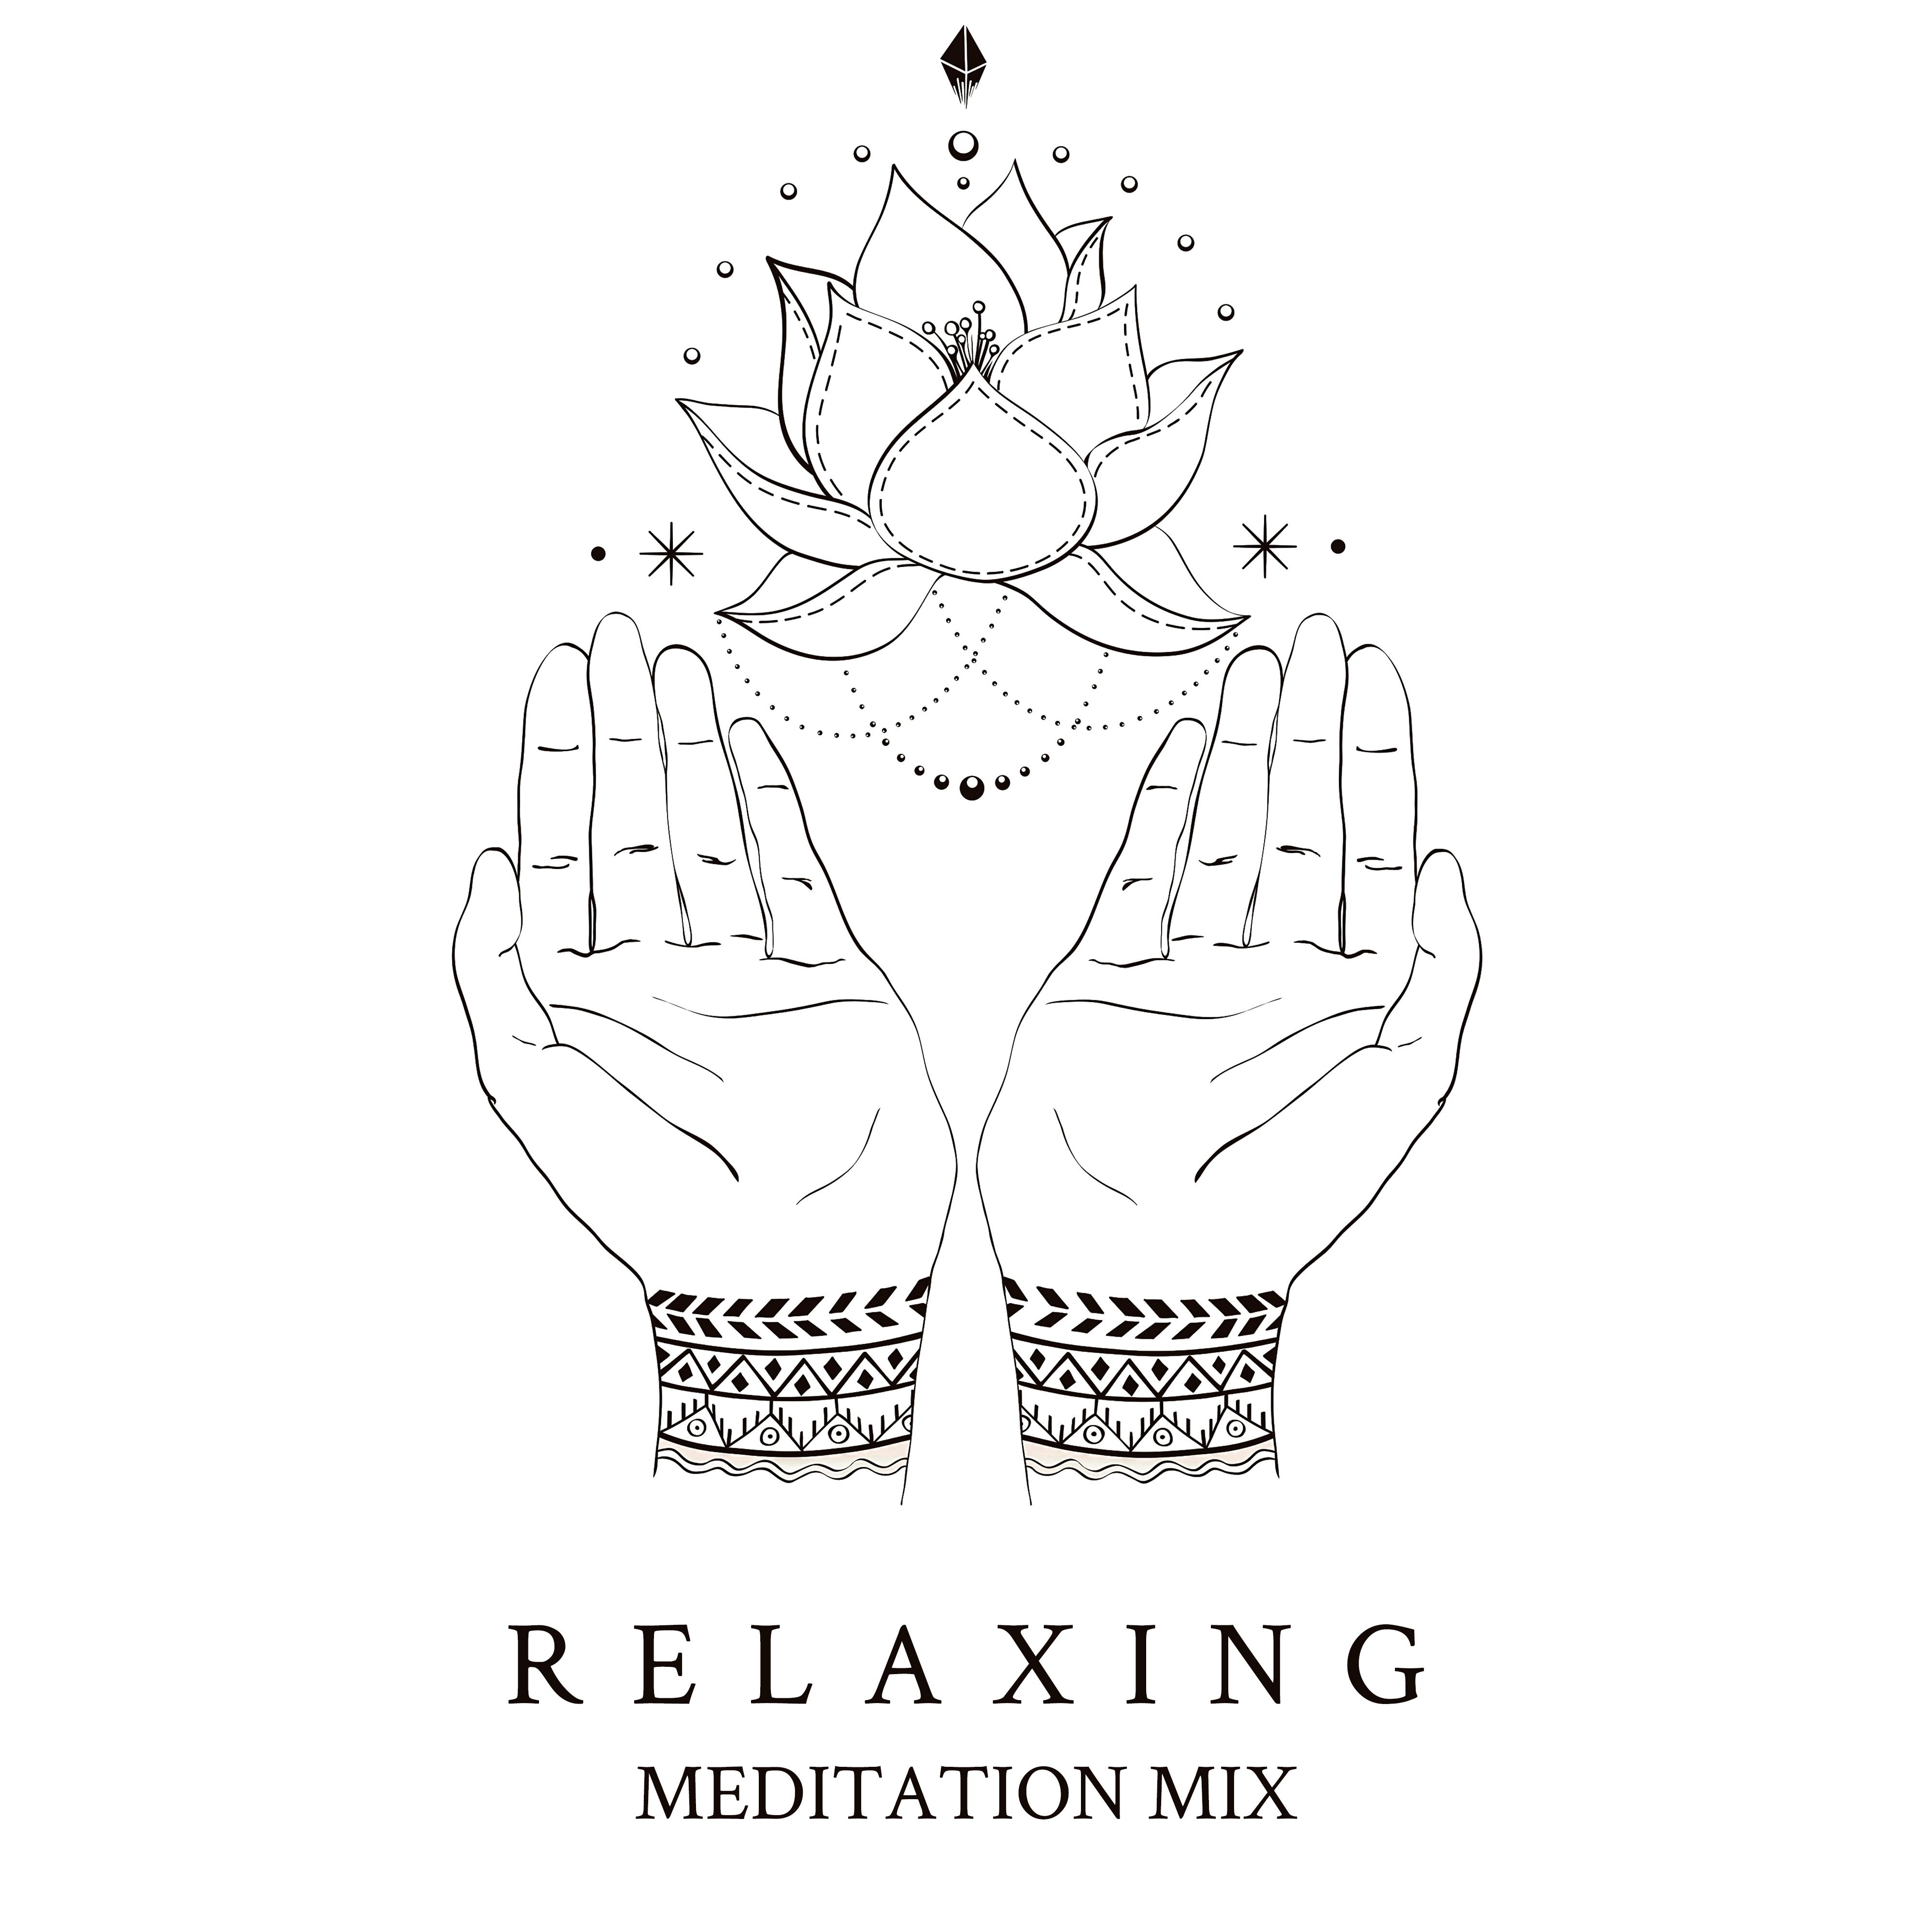 Relaxing Meditation Mix  Healing Relaxing Meditation, Soothing Sounds for Yoga, Relaxation, Inner Harmony, Sleep Thearpy, Ambient Yoga